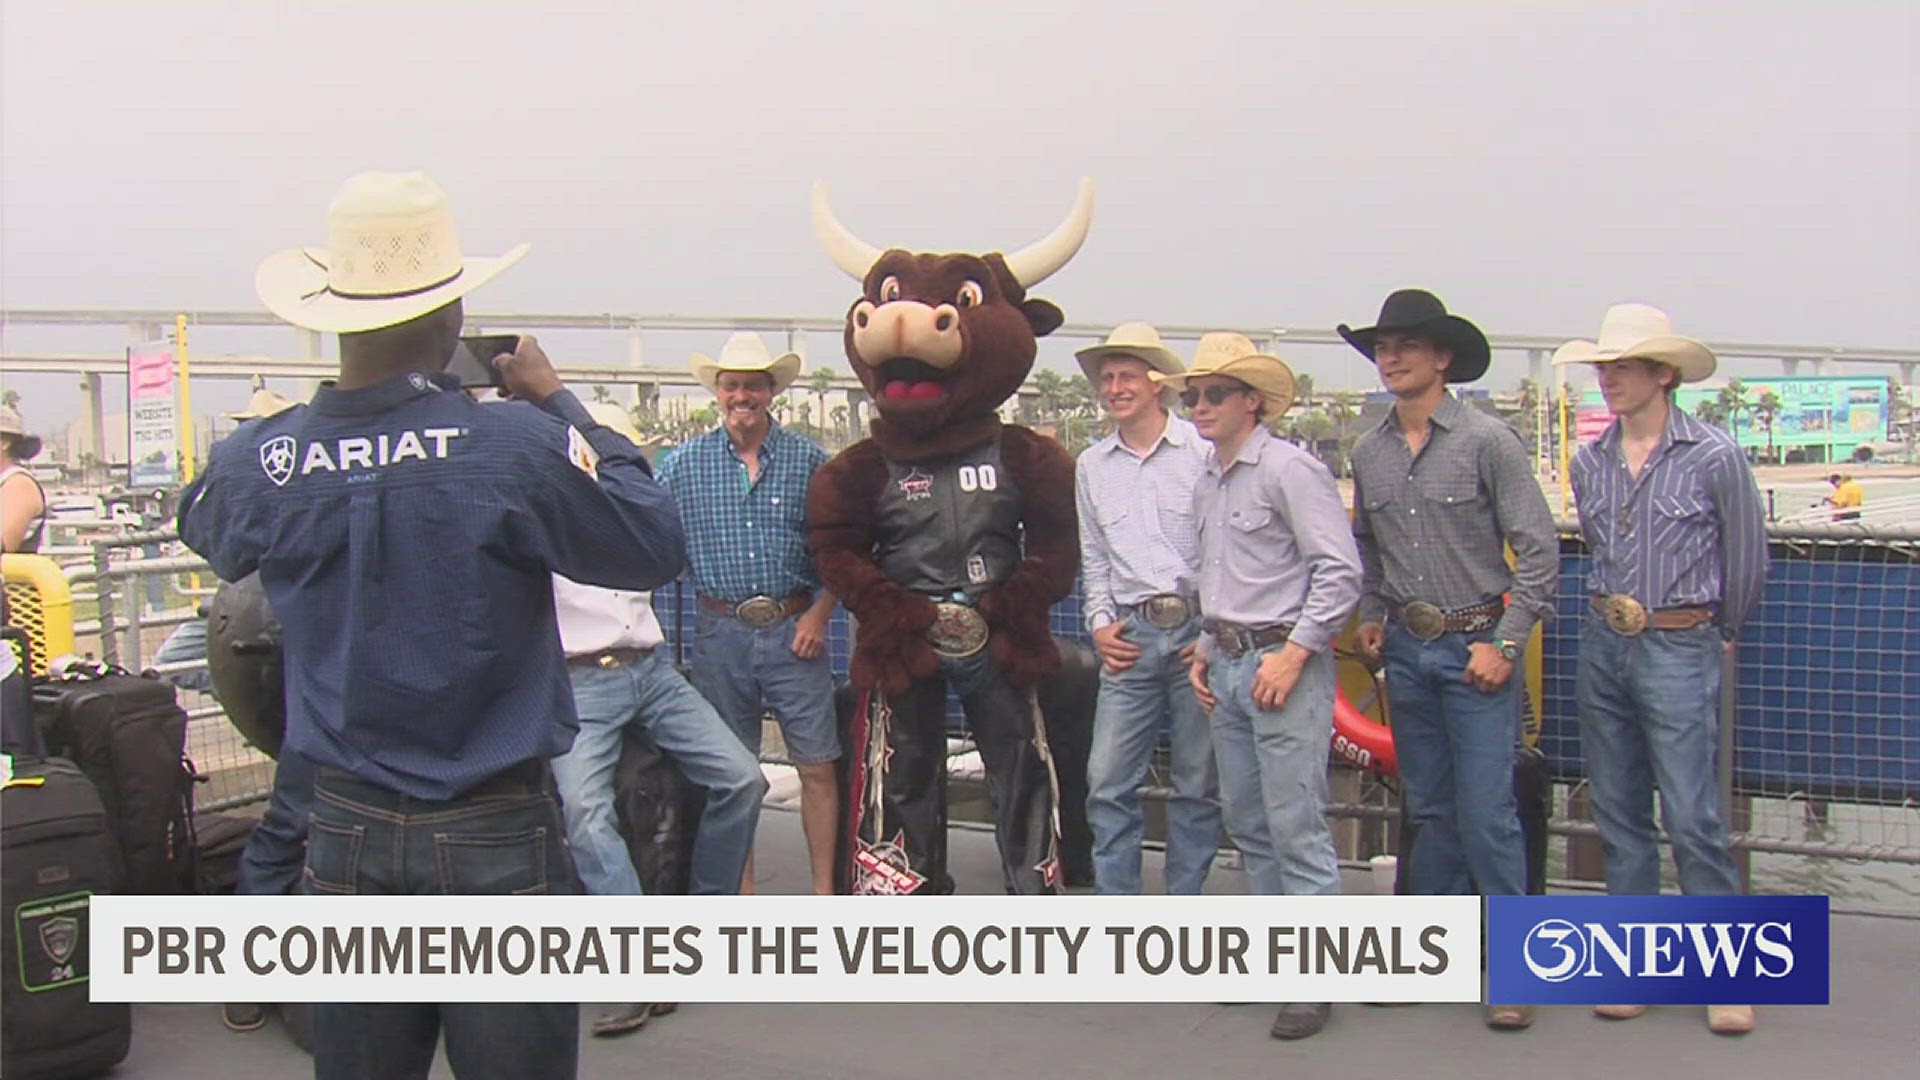 The event kick off was held aboard 'The Blue Ghost' on Friday morning with the PBR's top bucking bulls and Velocity Tour's most esteemed rider Michael Lane!